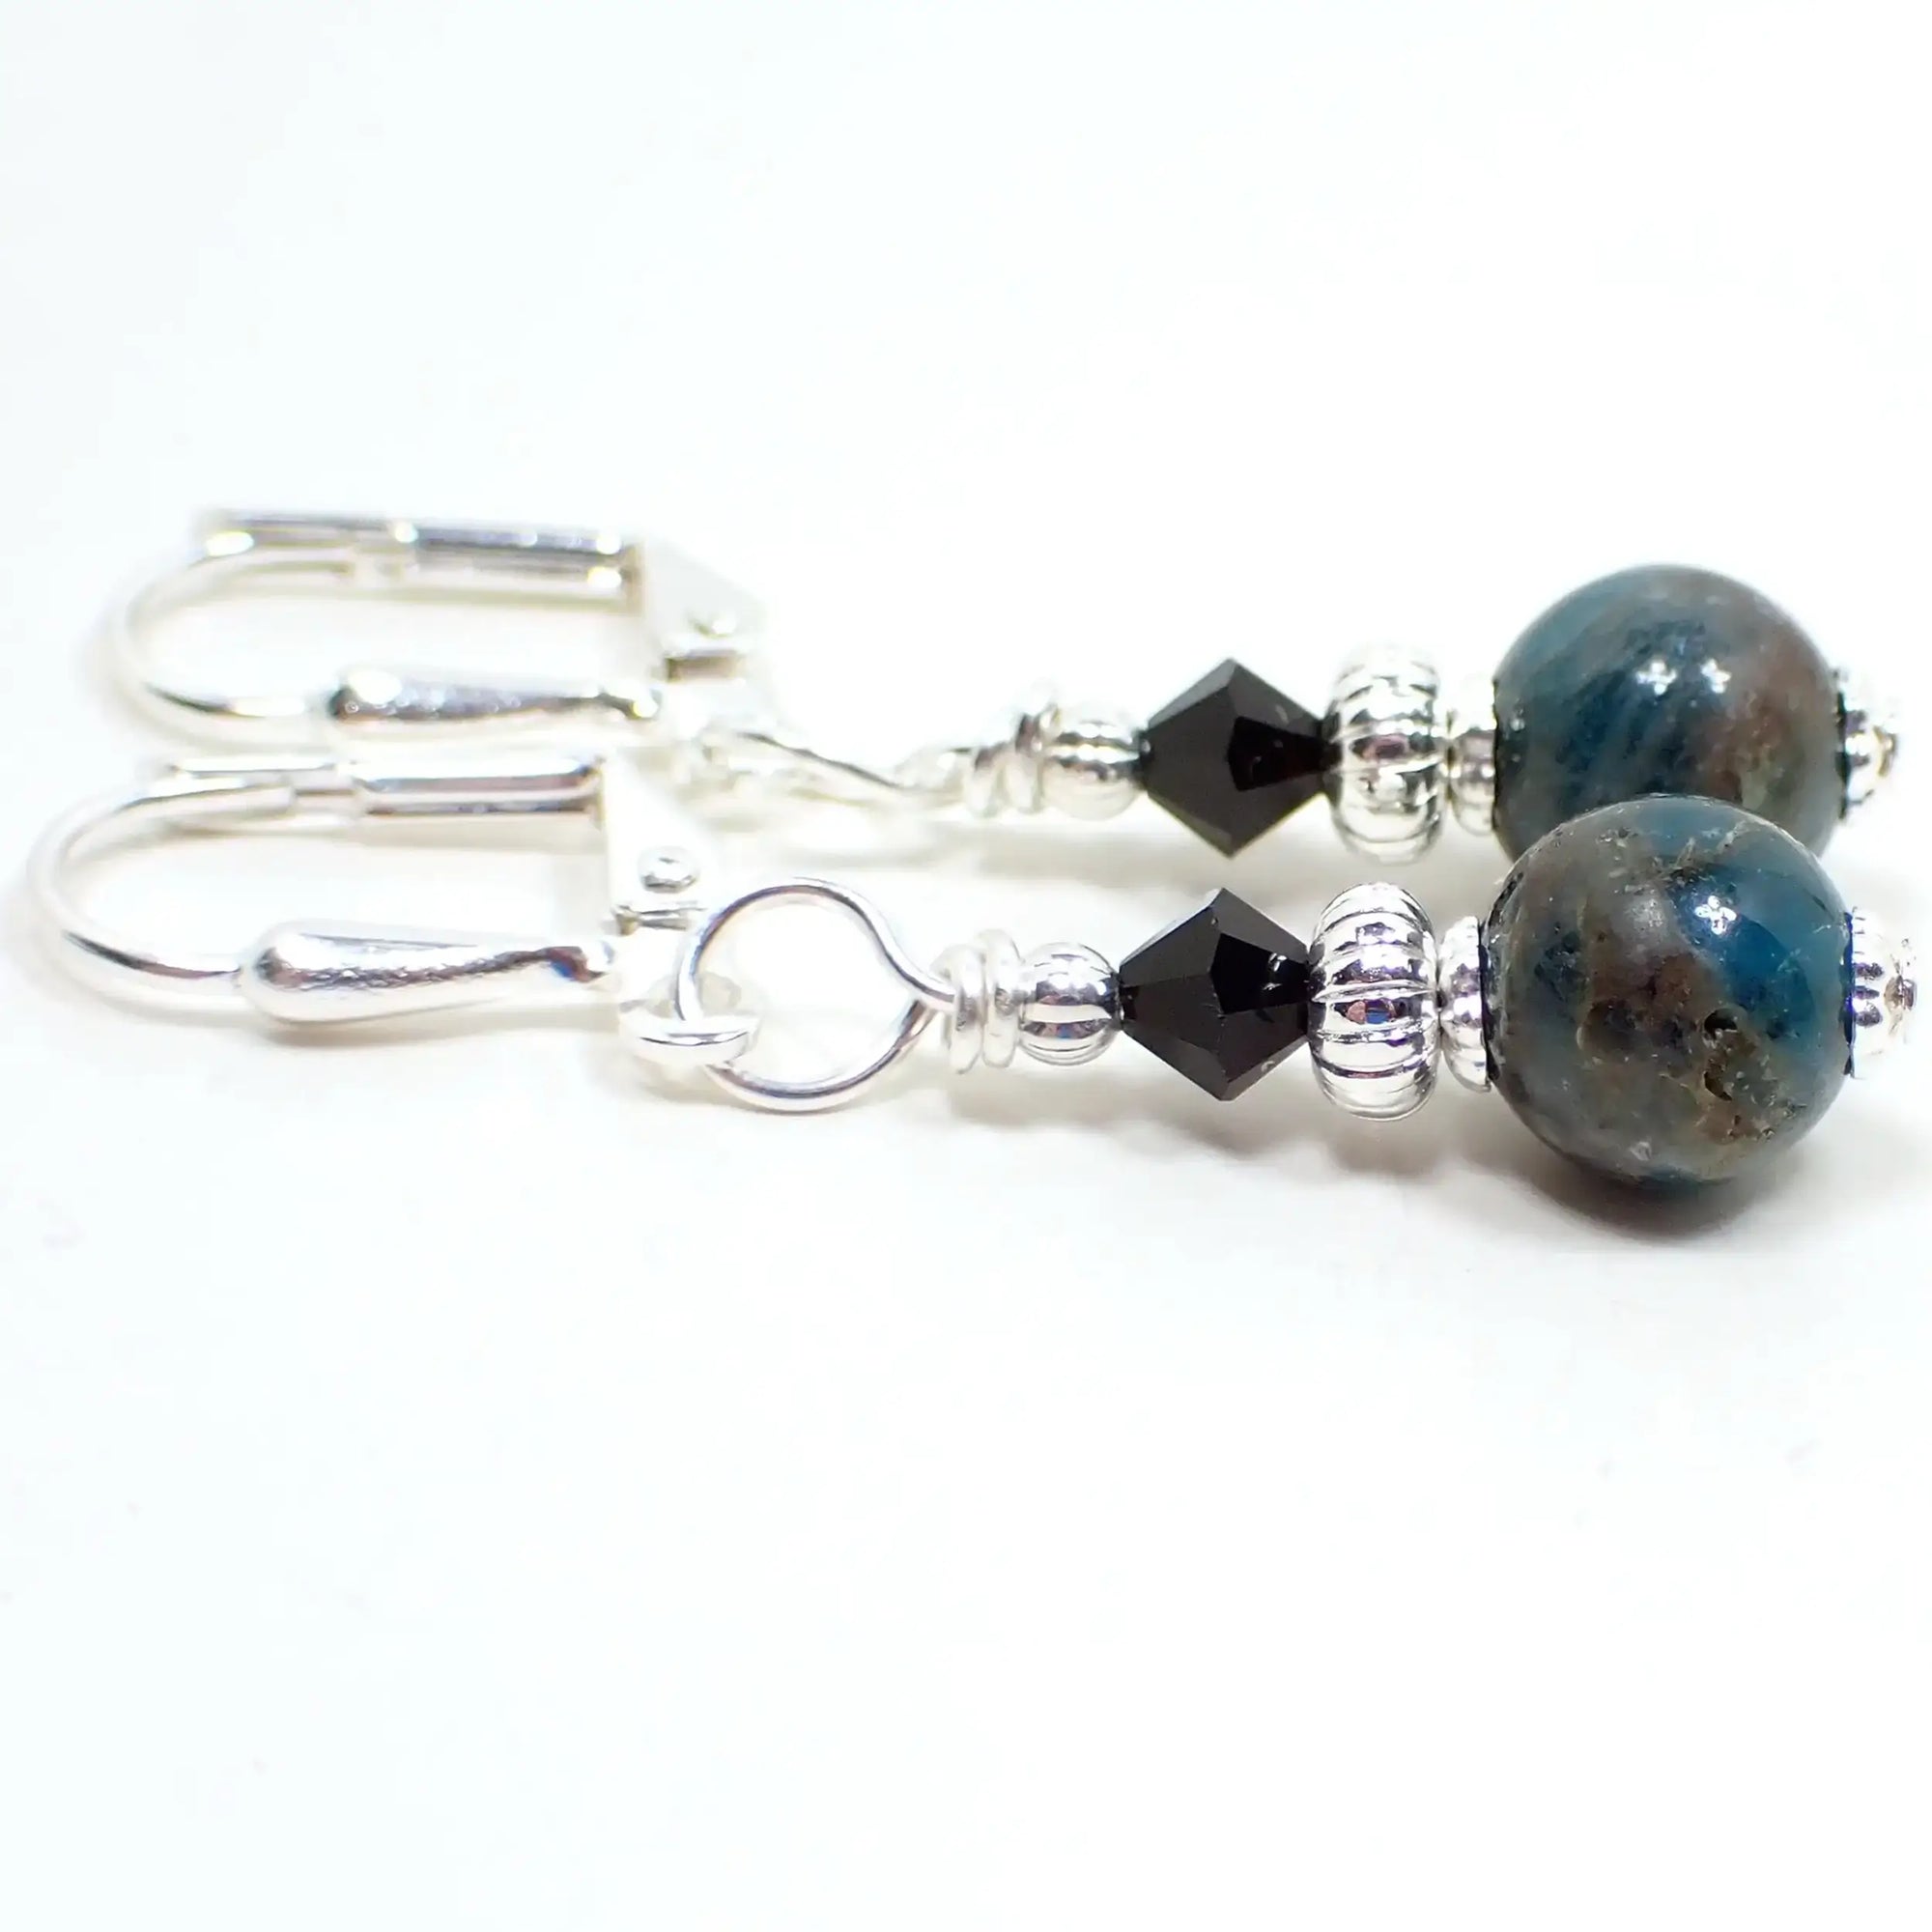 Enlarged side view of the small handmade apatite drop earrings. The metal is silver plated in color. There is a faceted glass crystal rondelle bead at the top and a small round ball apatite gemstone bead at the bottom. The gemstone is a marbled teal blue in color.